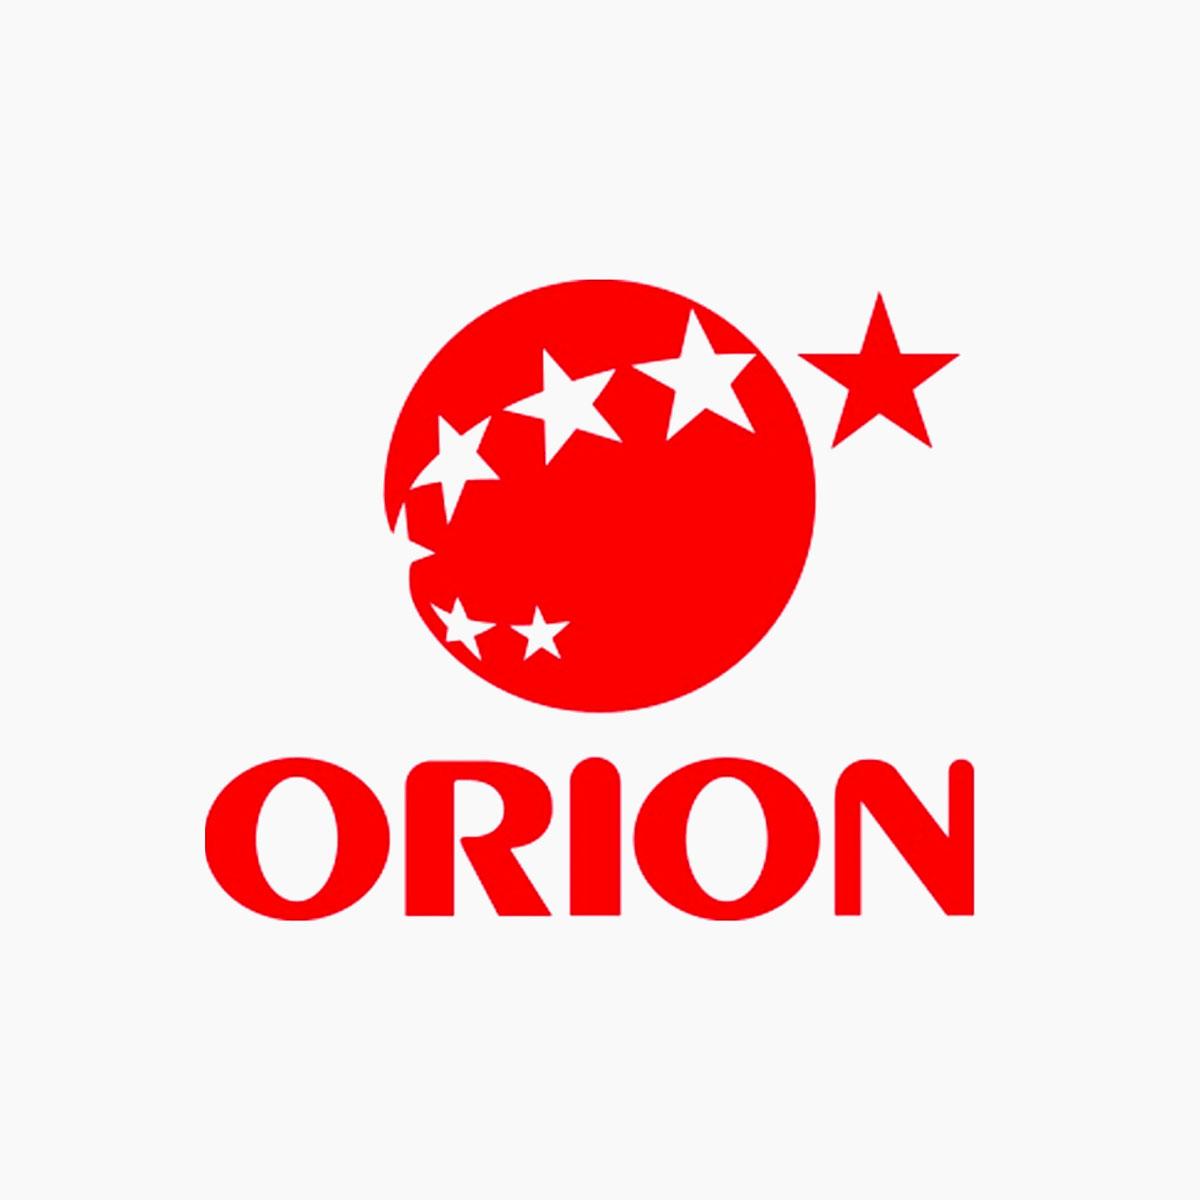 ORION 好麗友